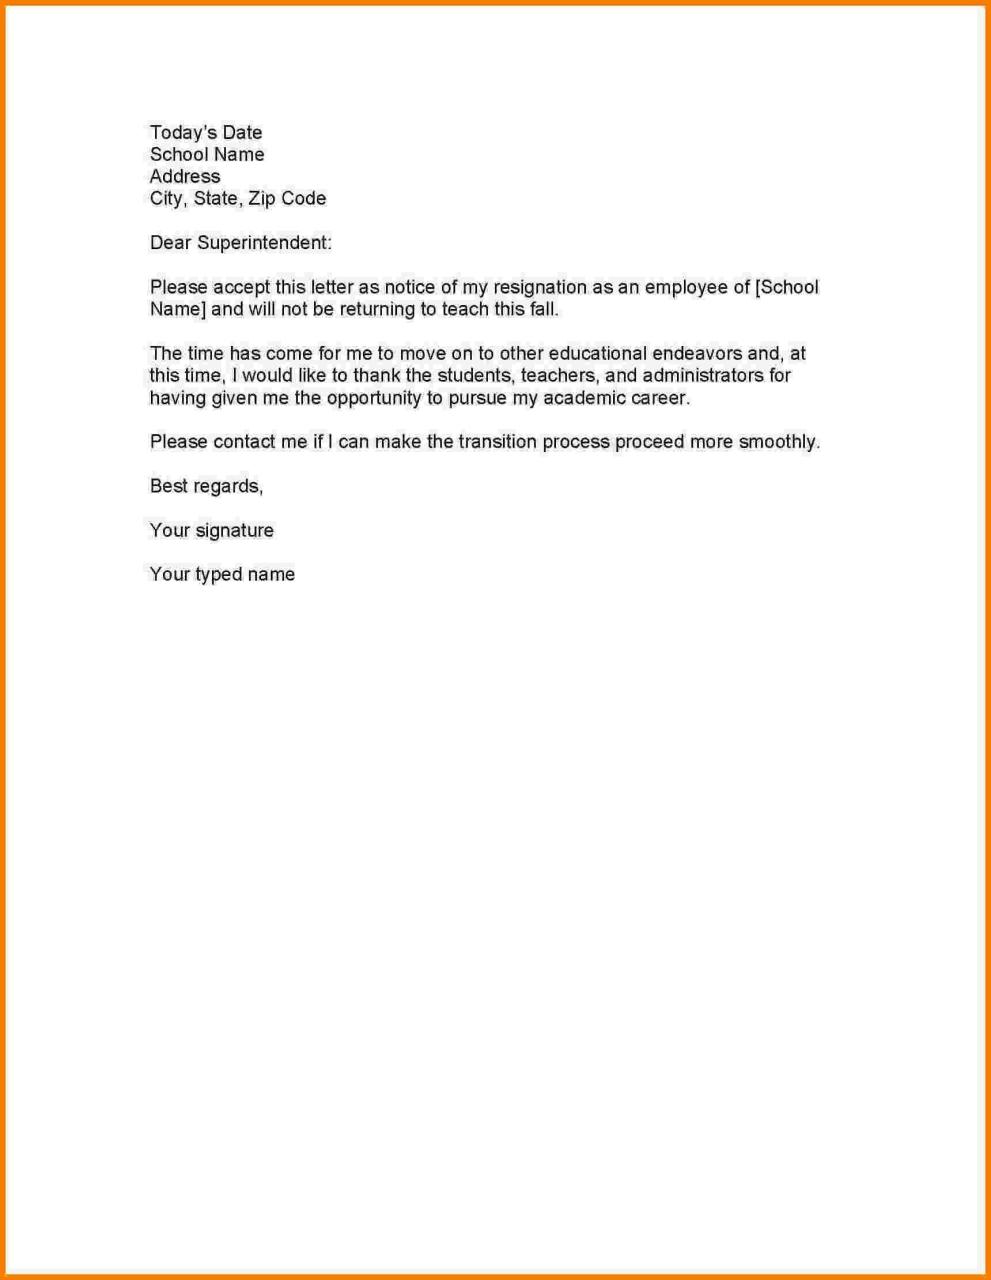 New Resignation Letter for Lecturer Job you can download for full